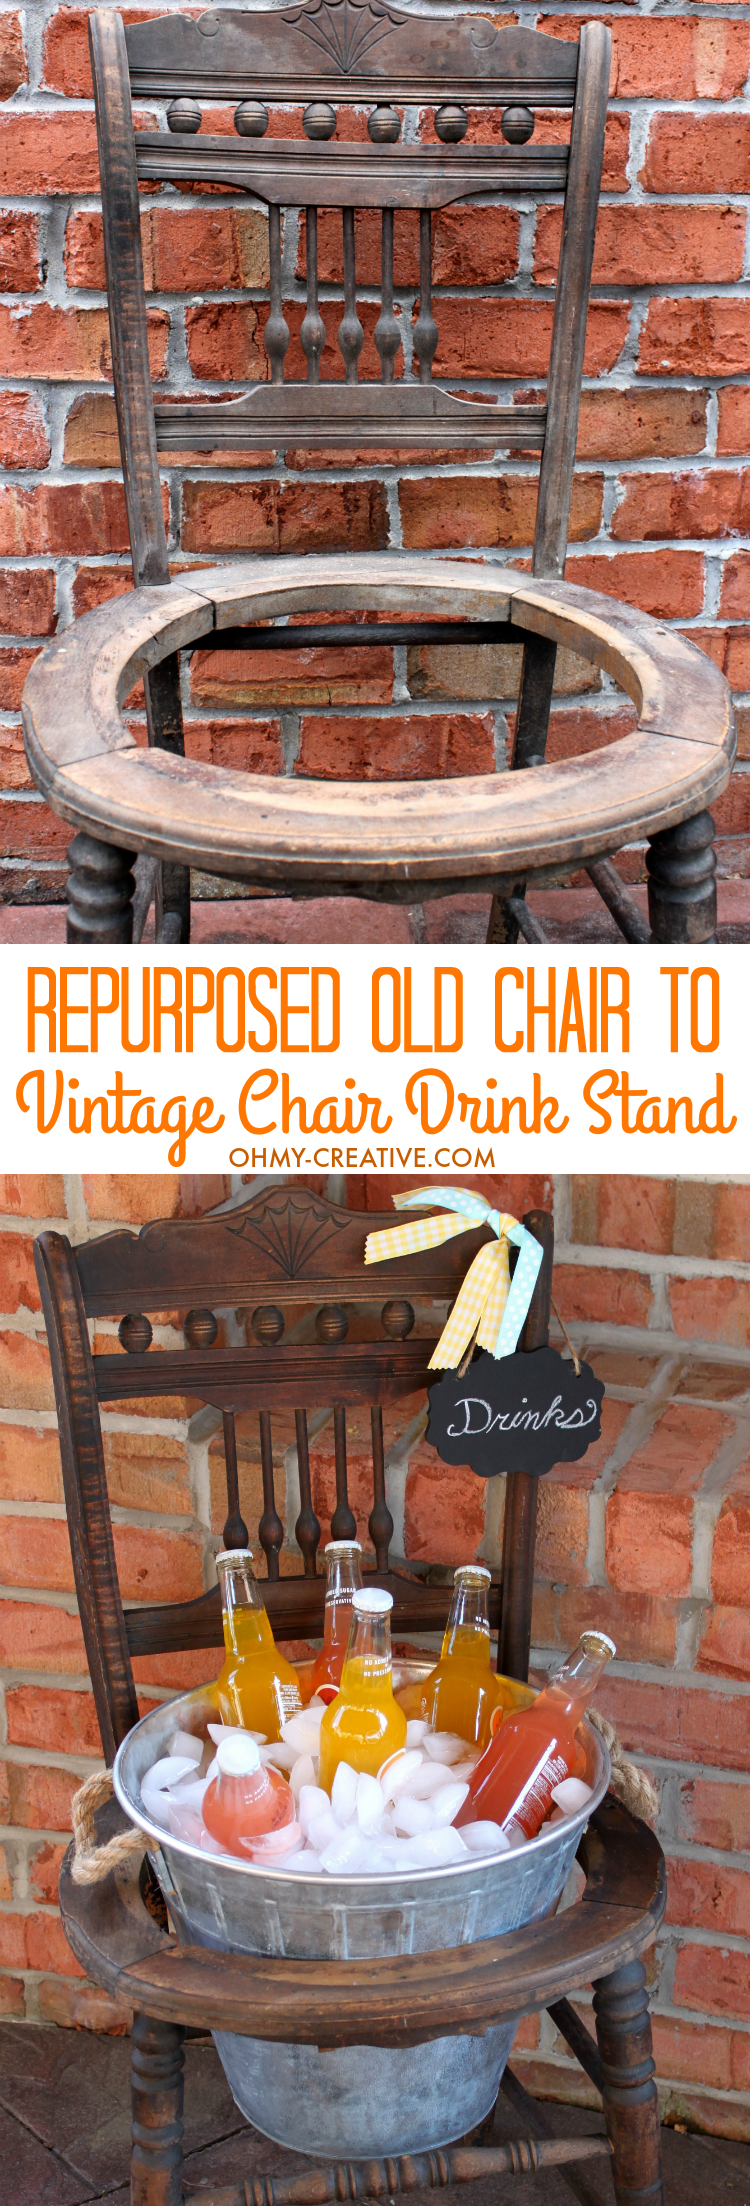 Repurpose an old vintage chair into a pretty drink stand! Perfect for entertaining, parties or bridal showers! | OHMY-CREATIVE.COM